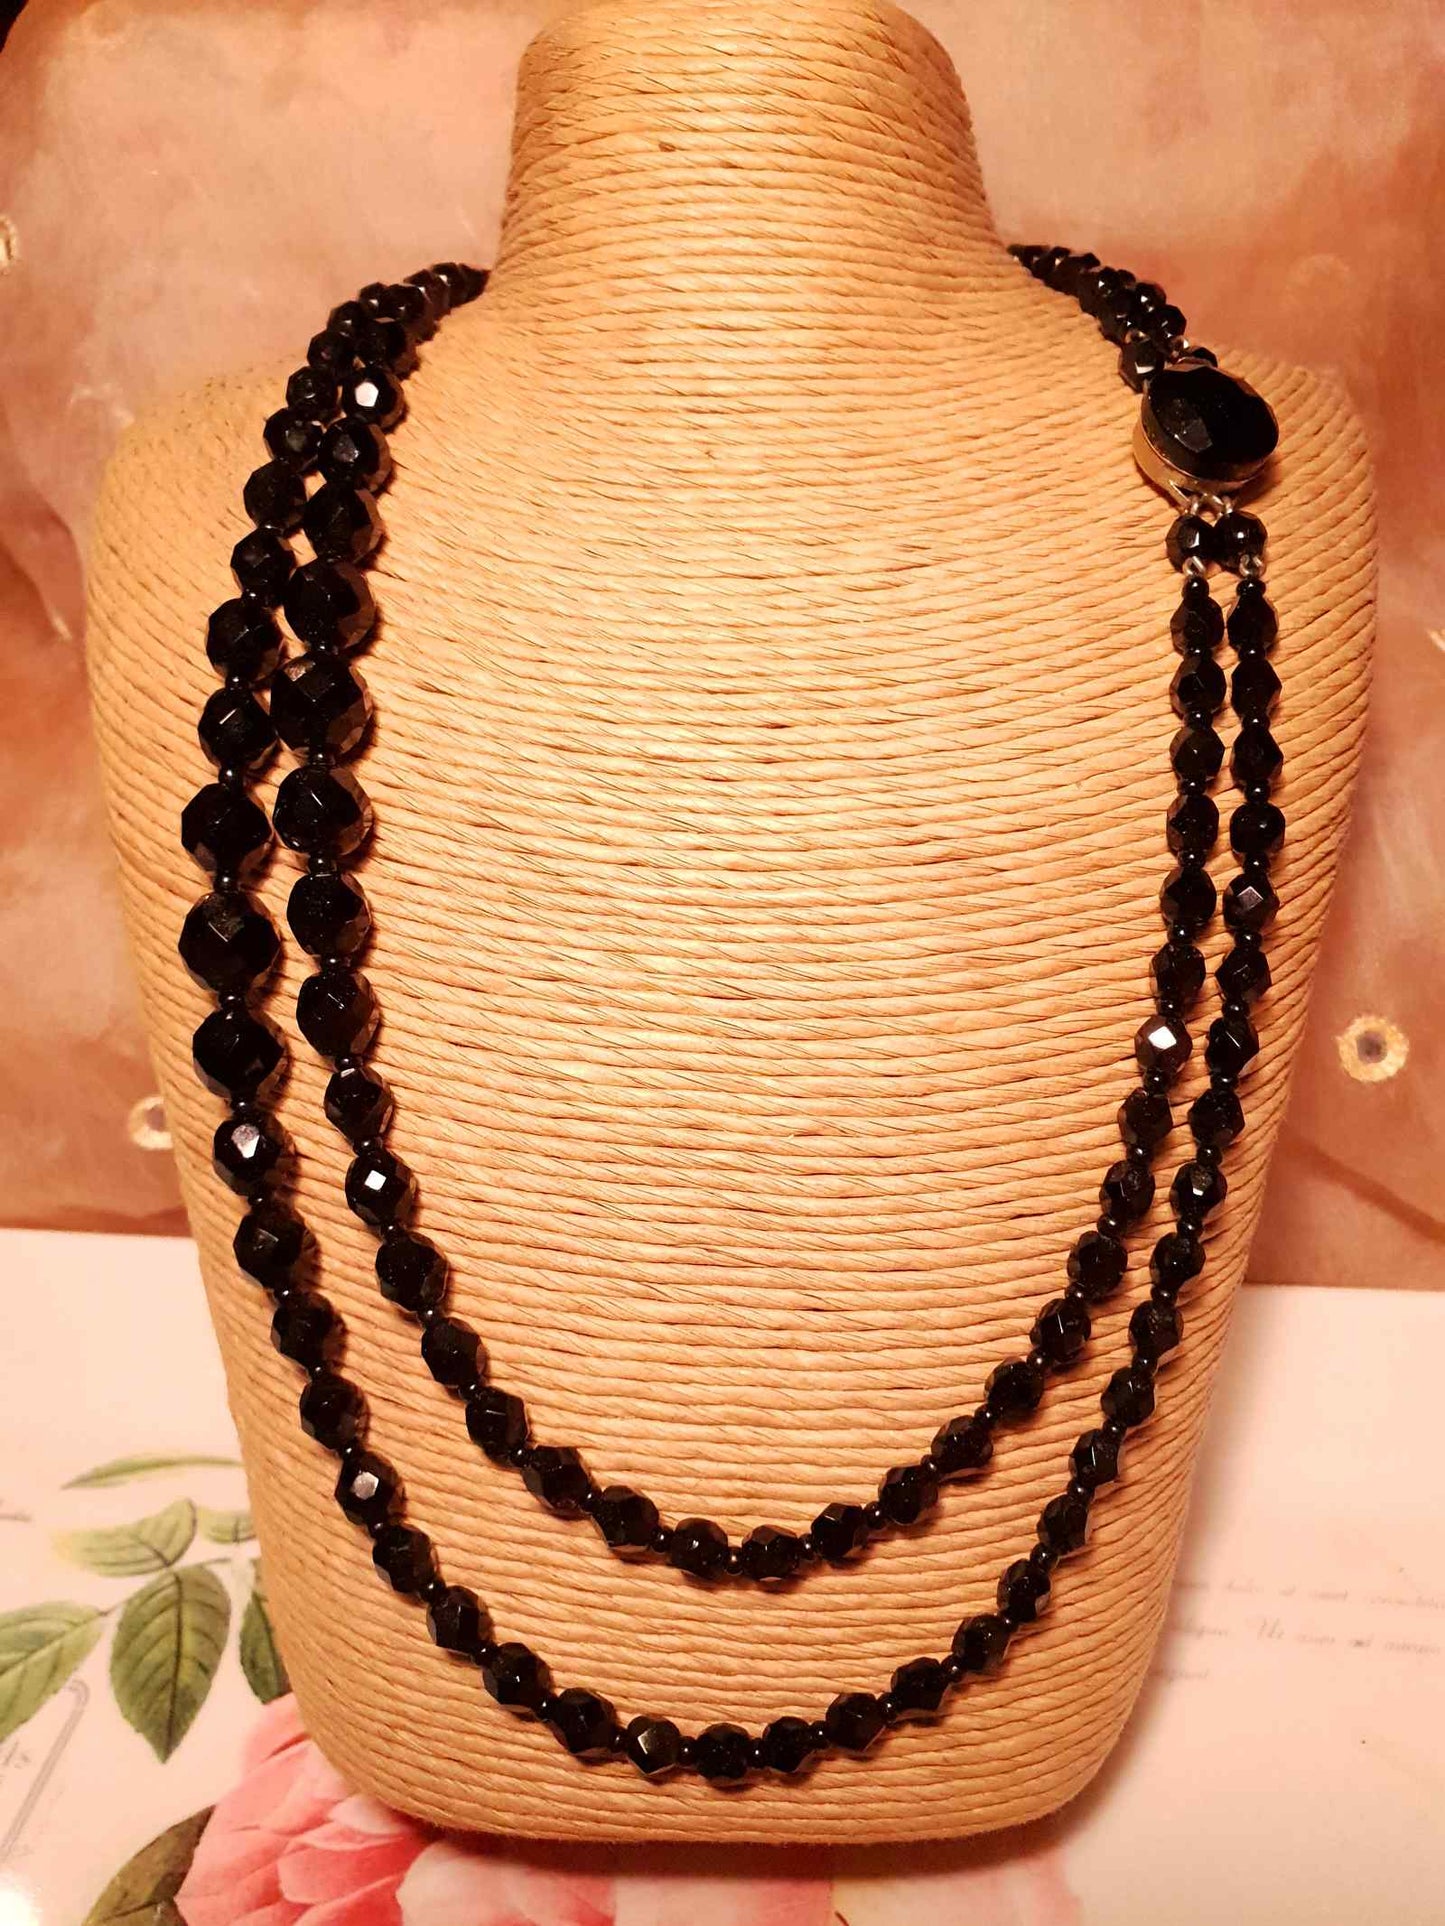 Vintage 1960s French Jet Necklace Double Strand Black Faceted Beads